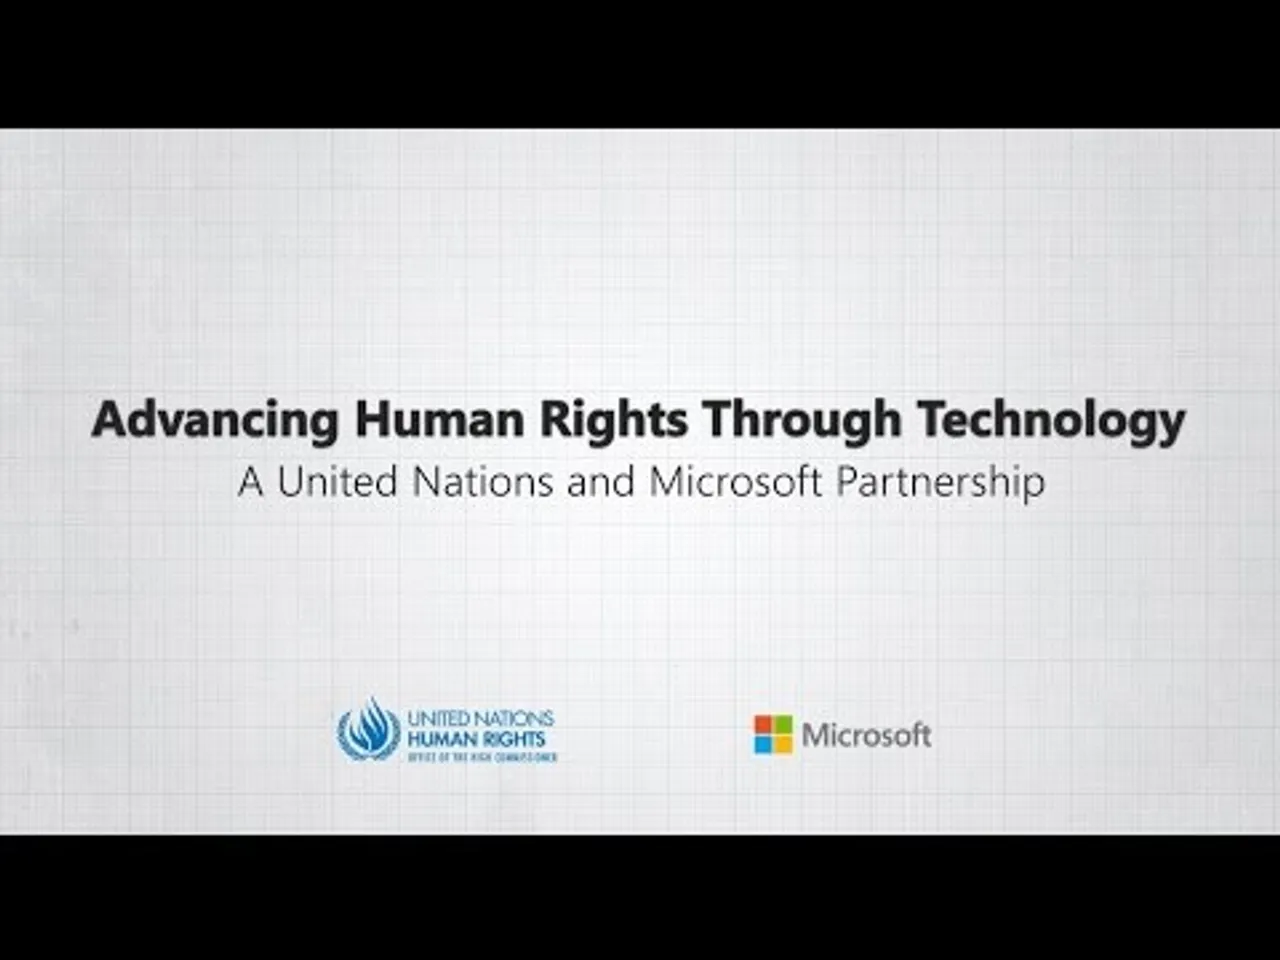 UN Human Rights Office partners with Microsoft